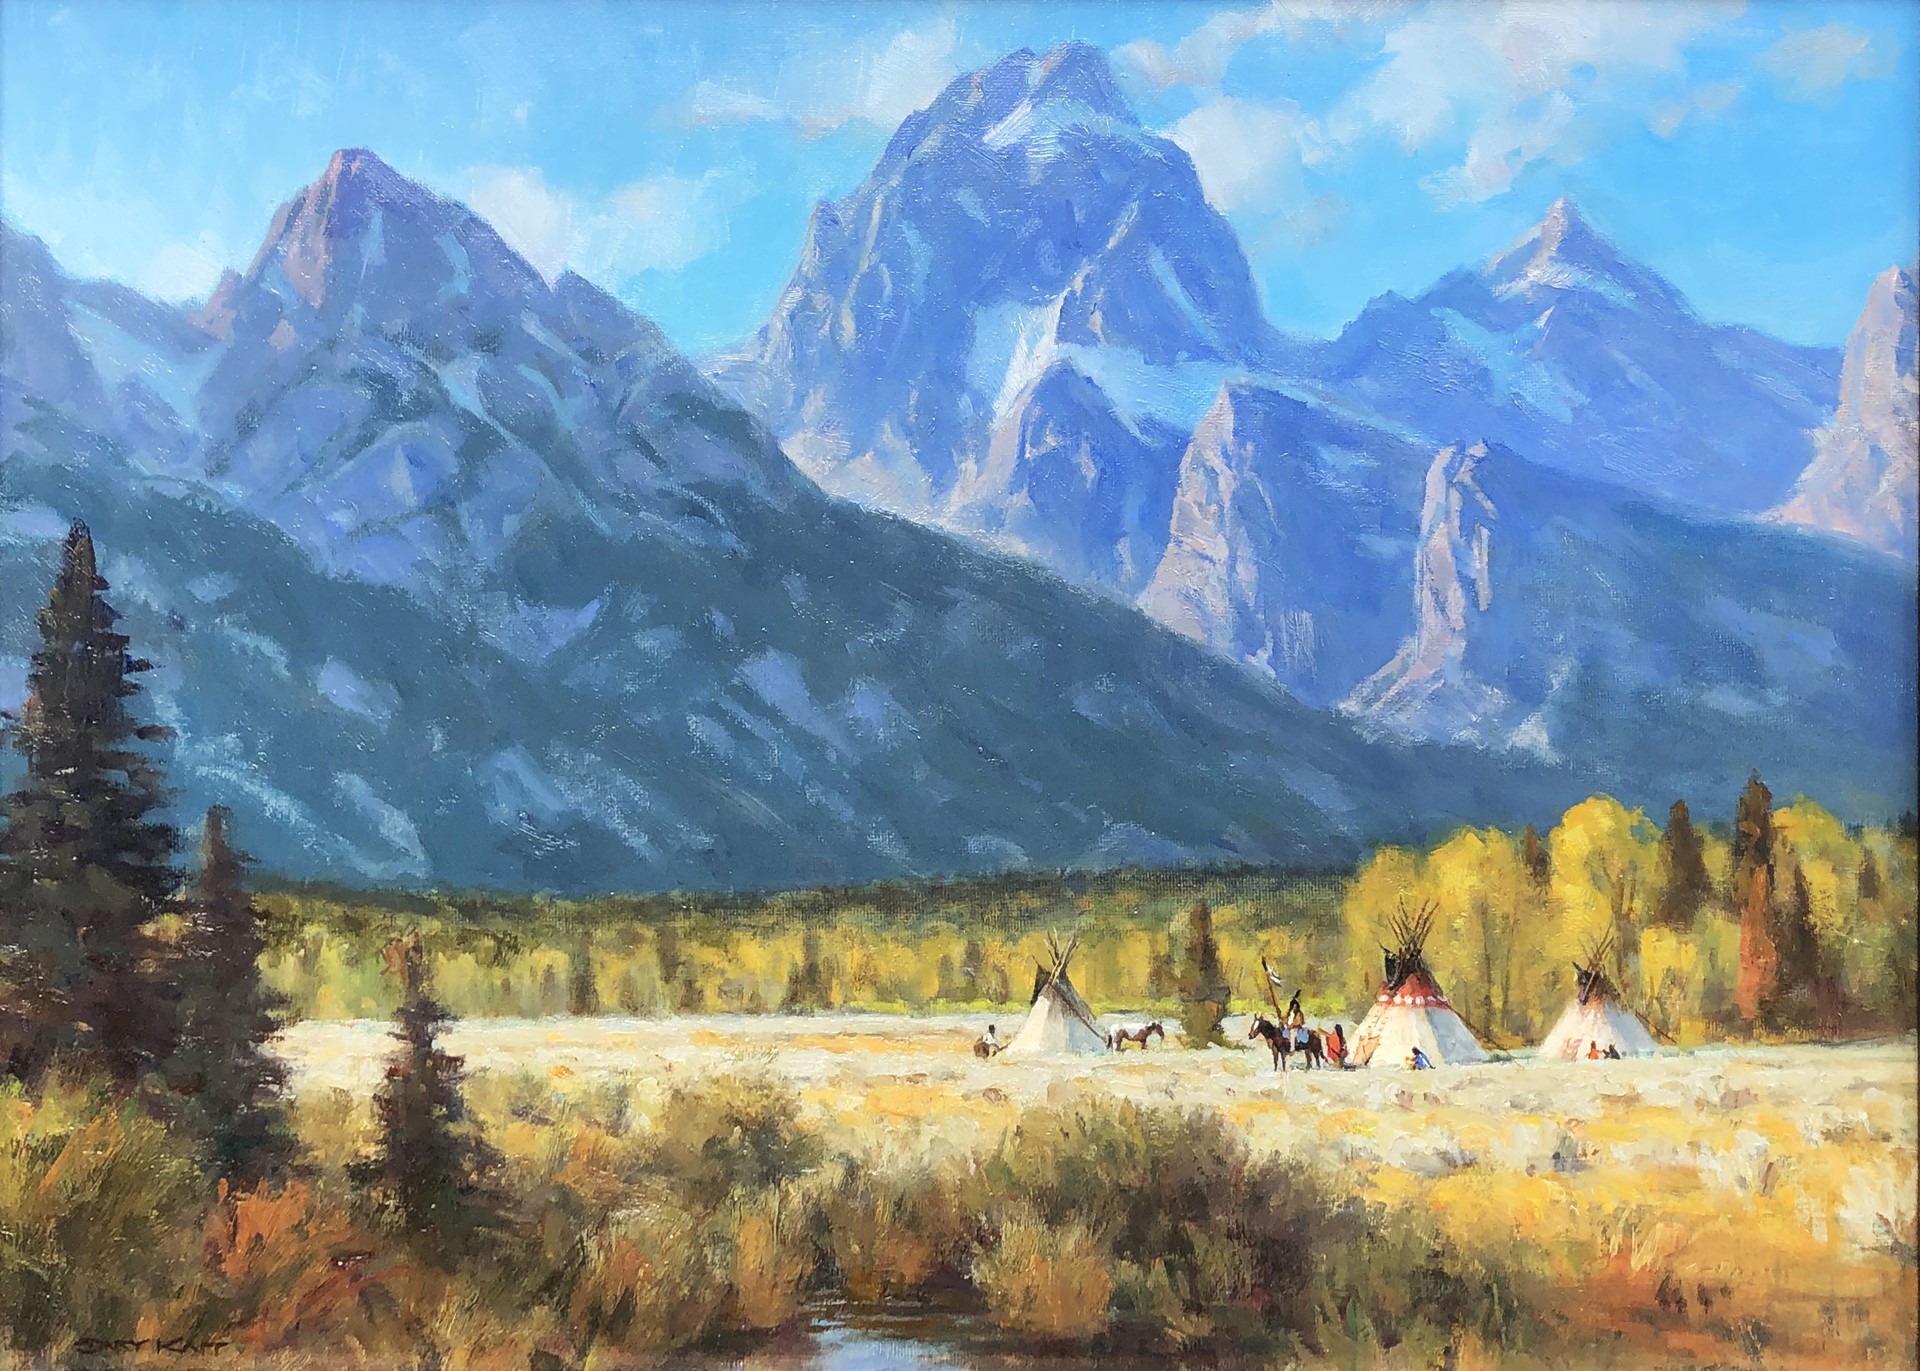 Blackfoot in the Valley by Gary Kapp